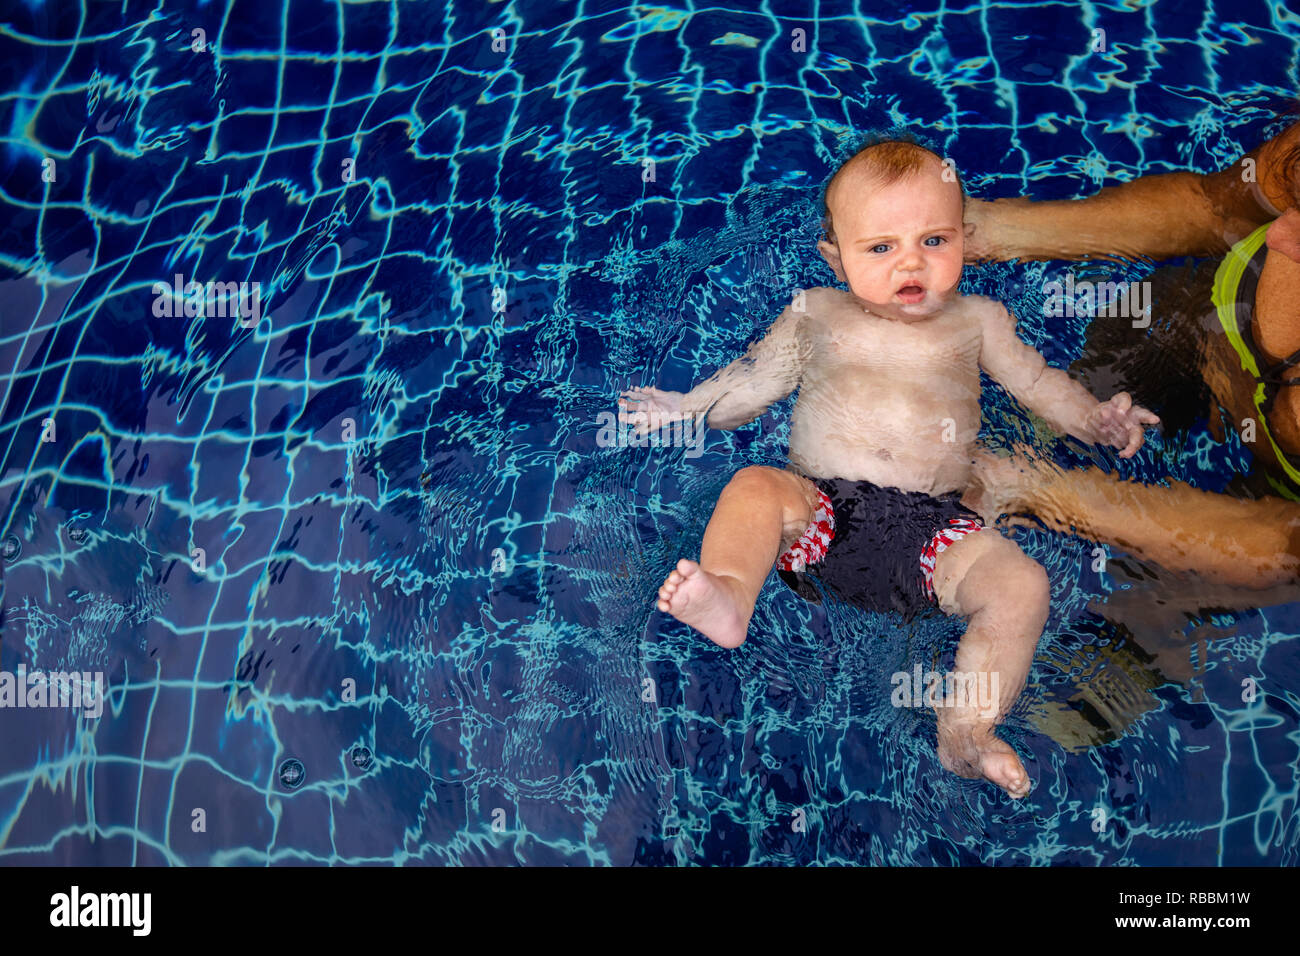 Little boy swimming in pool with parent Stock Photo